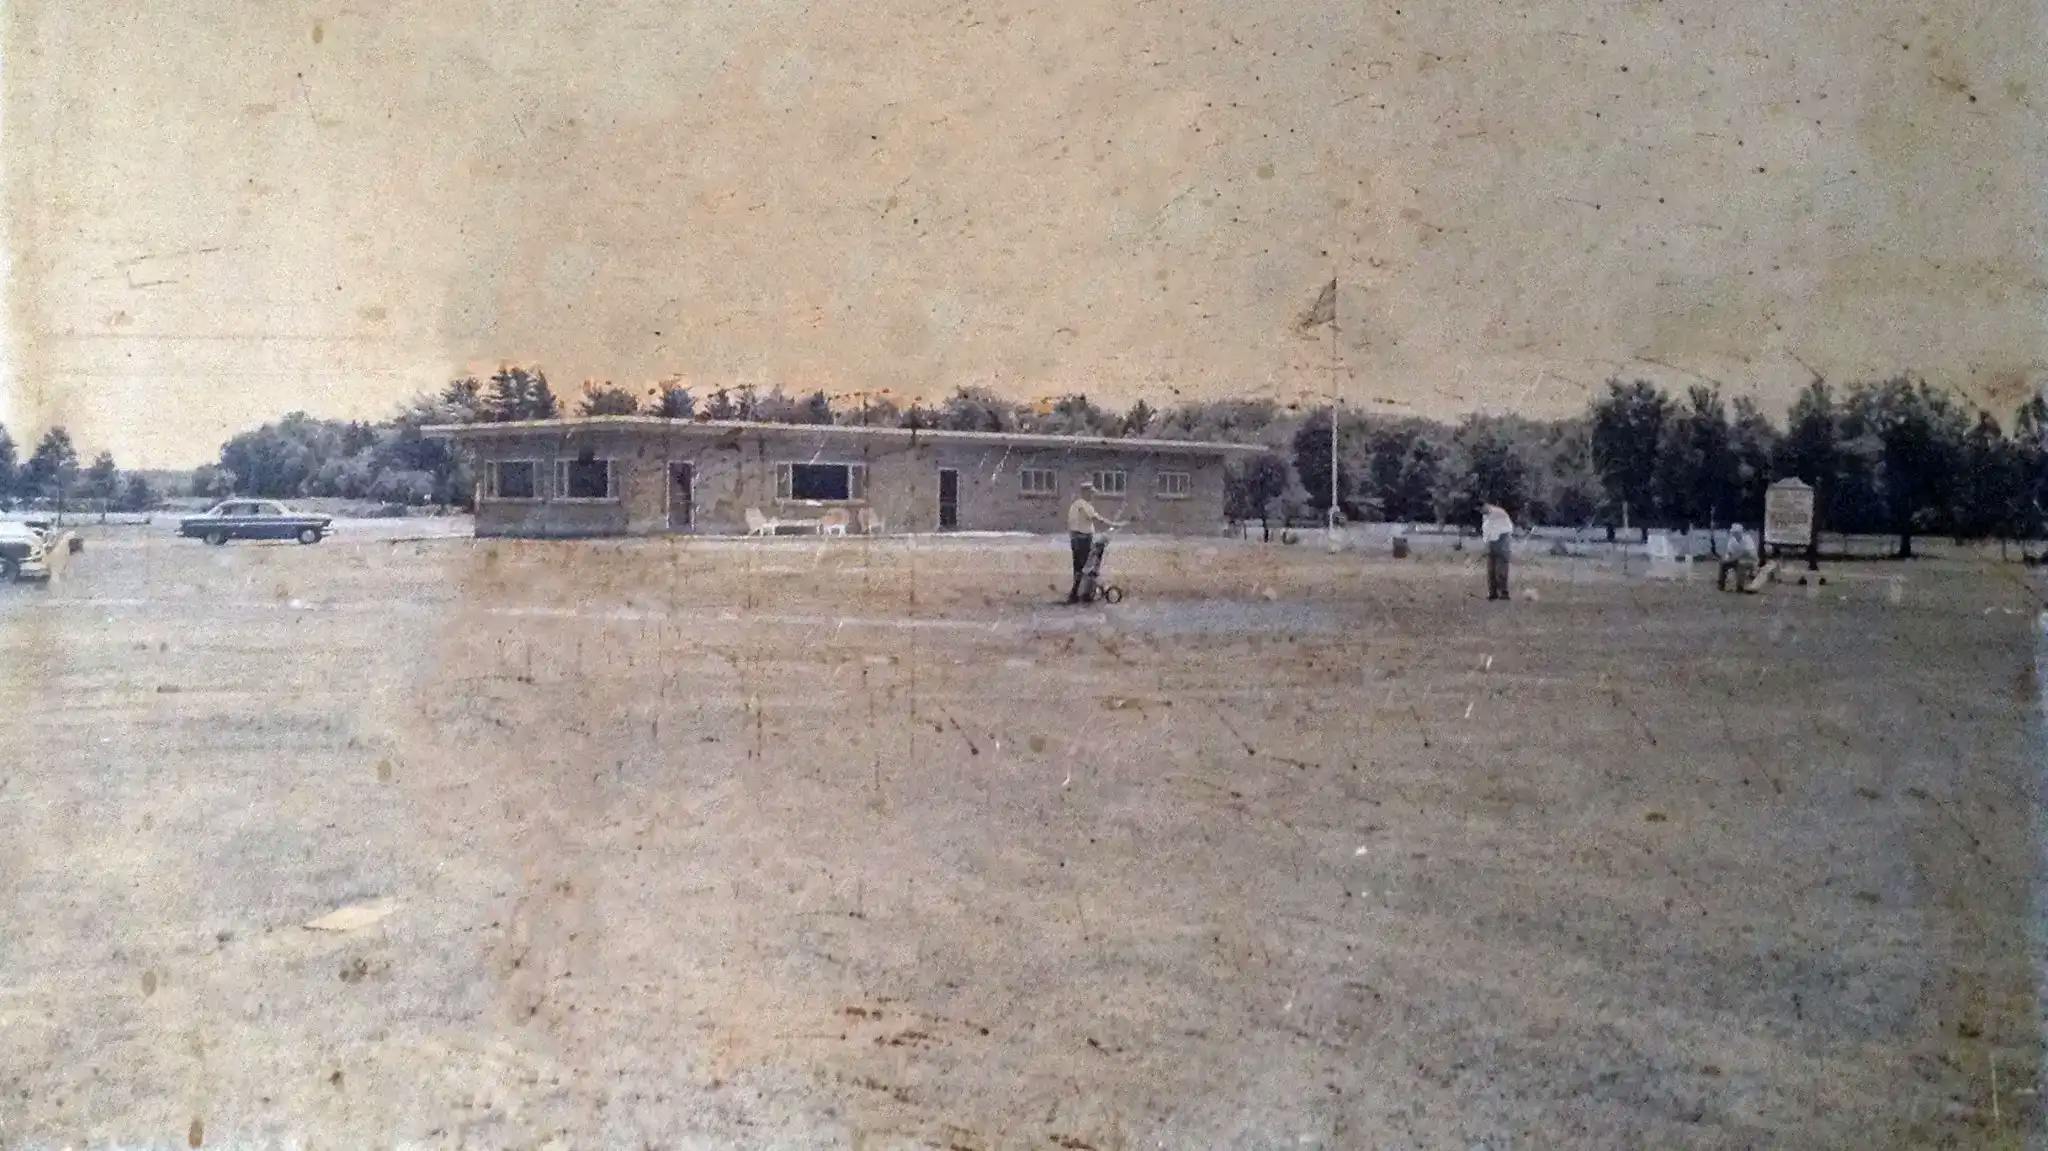 The clubhouse in 1954